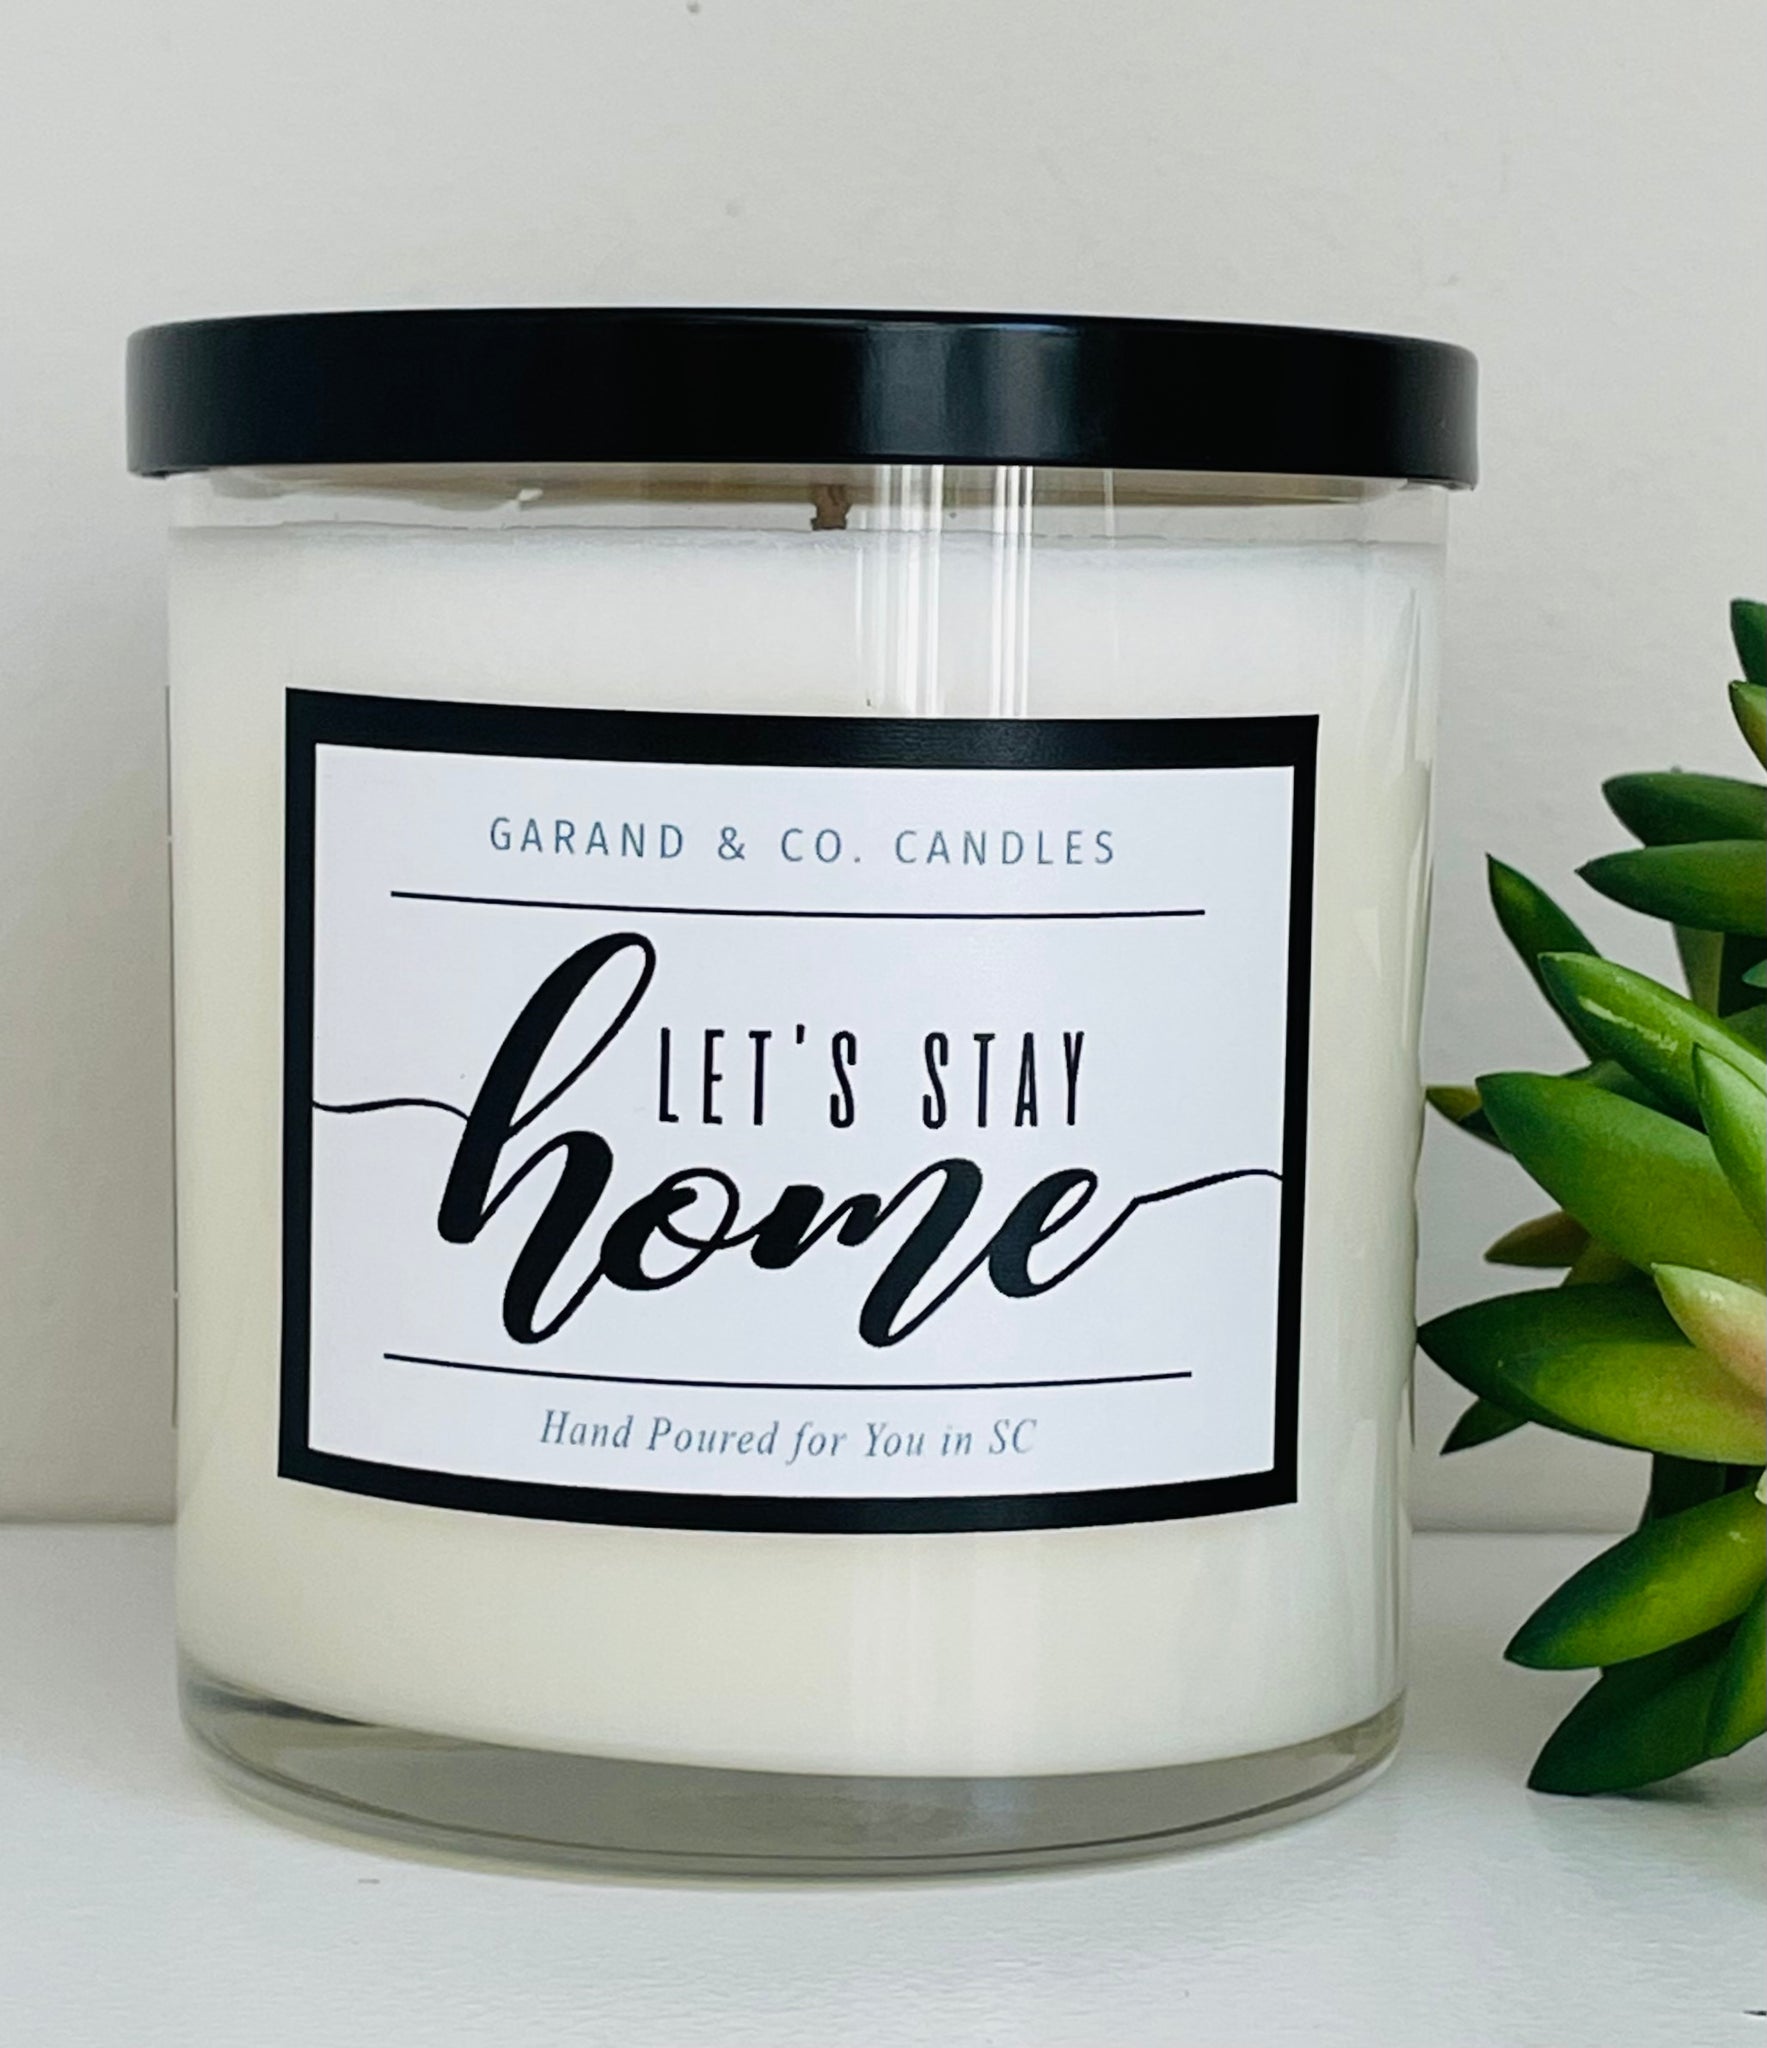 12 oz Clear Glass Jar Candle - Let’s Stay Home